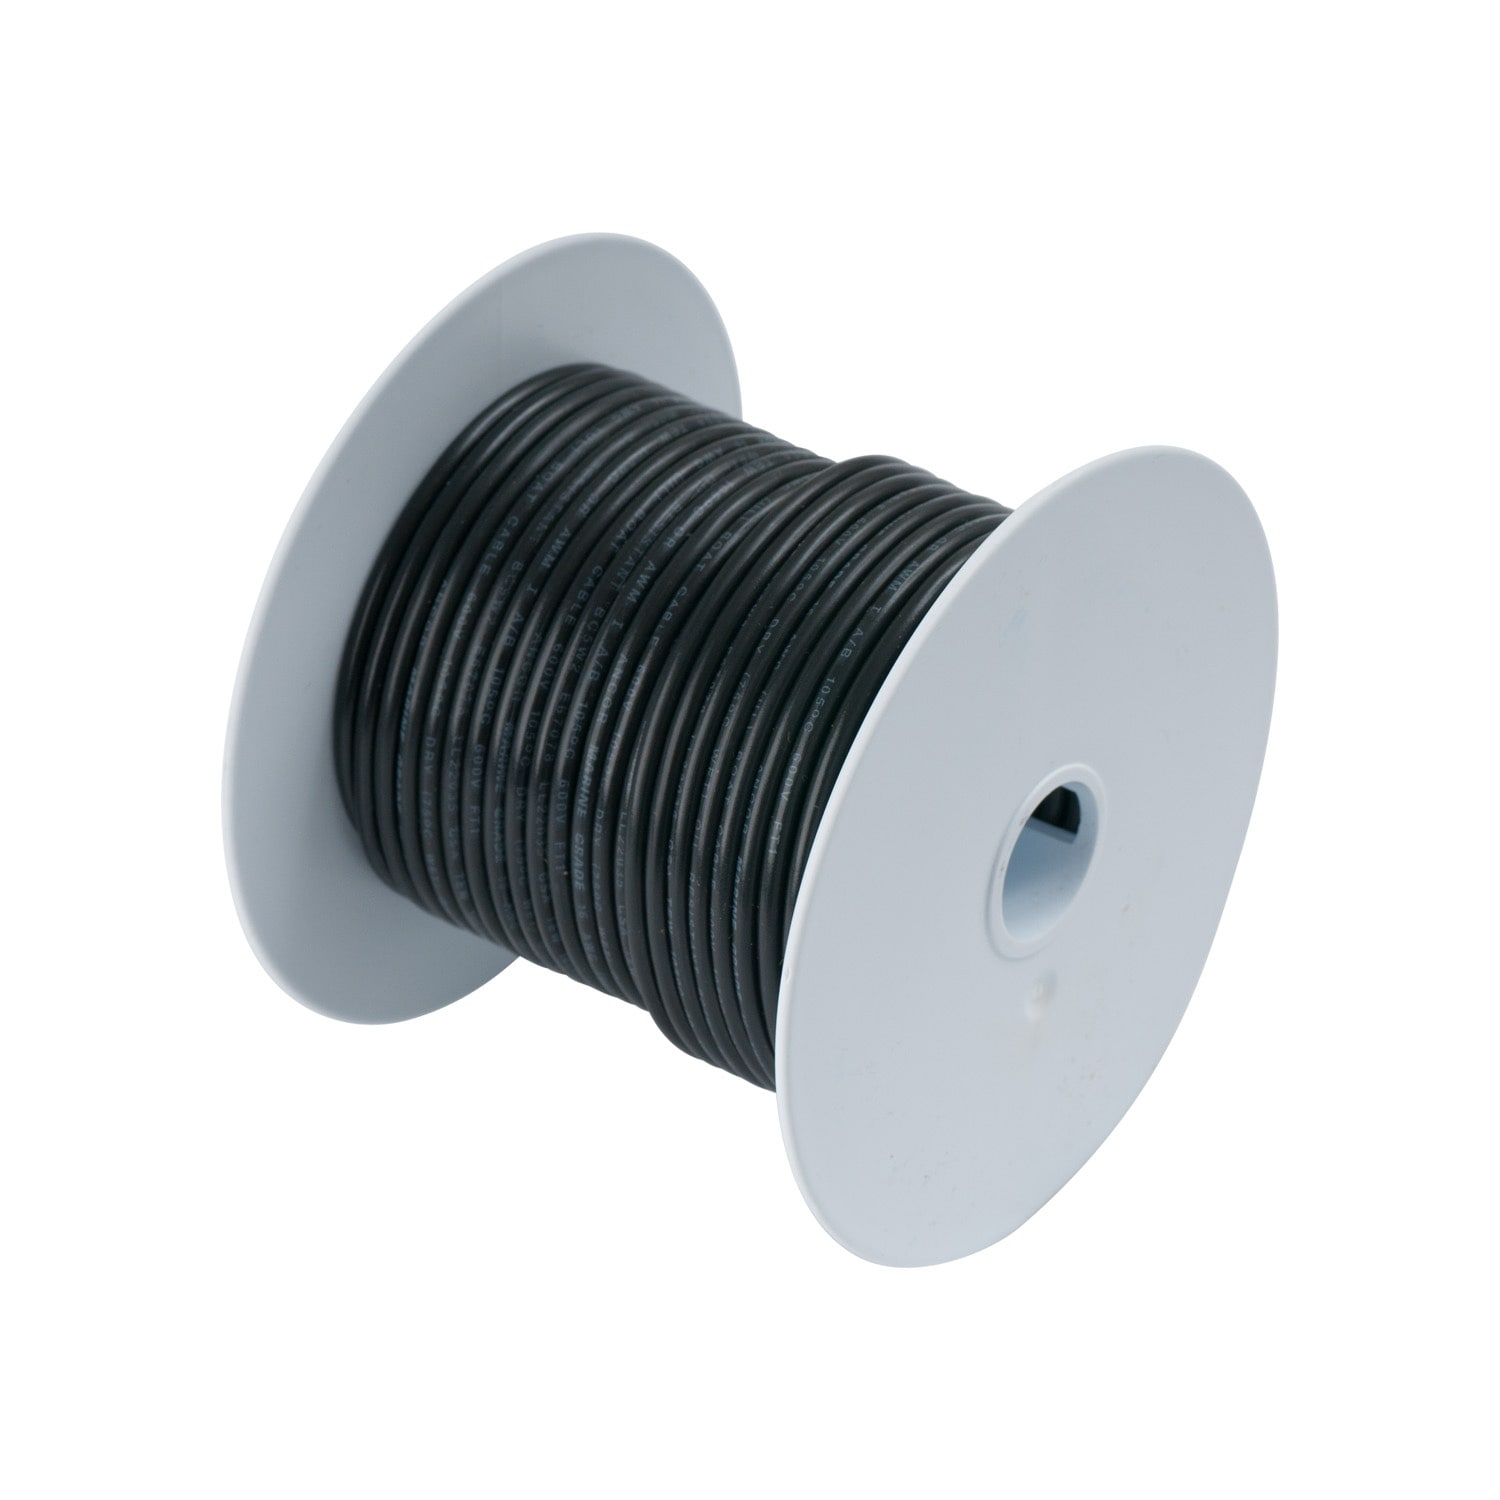 Calterm 52147 Electrical Primary Wire 100 ft. Black 14 AWG 